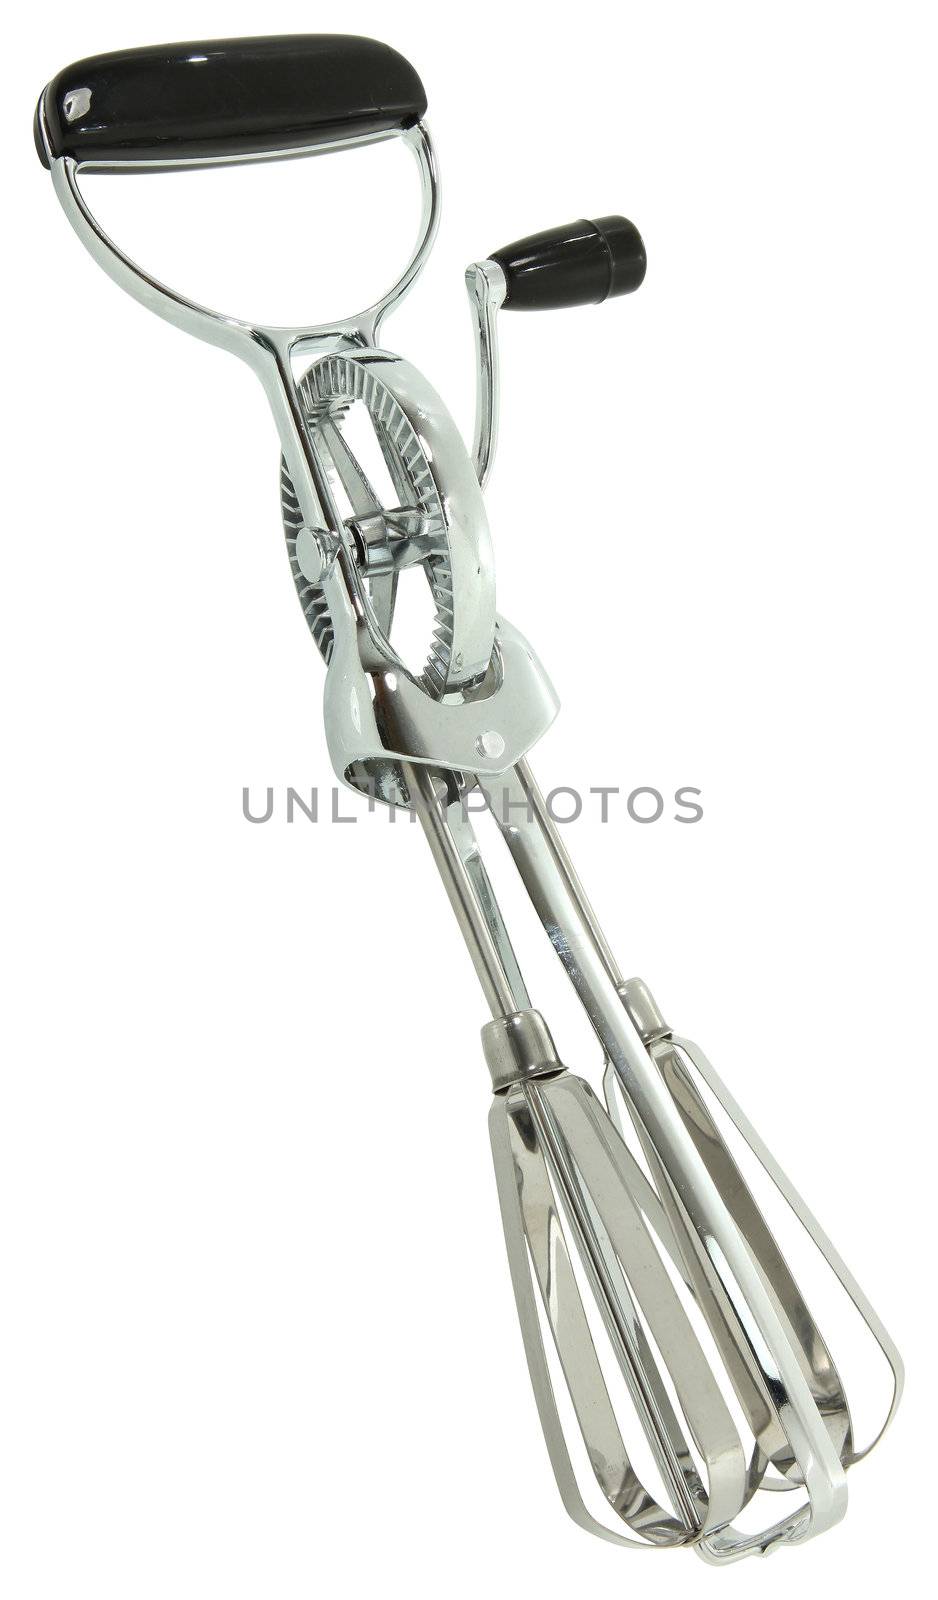 Manual Hand Crank Egg Beater over White by duplass